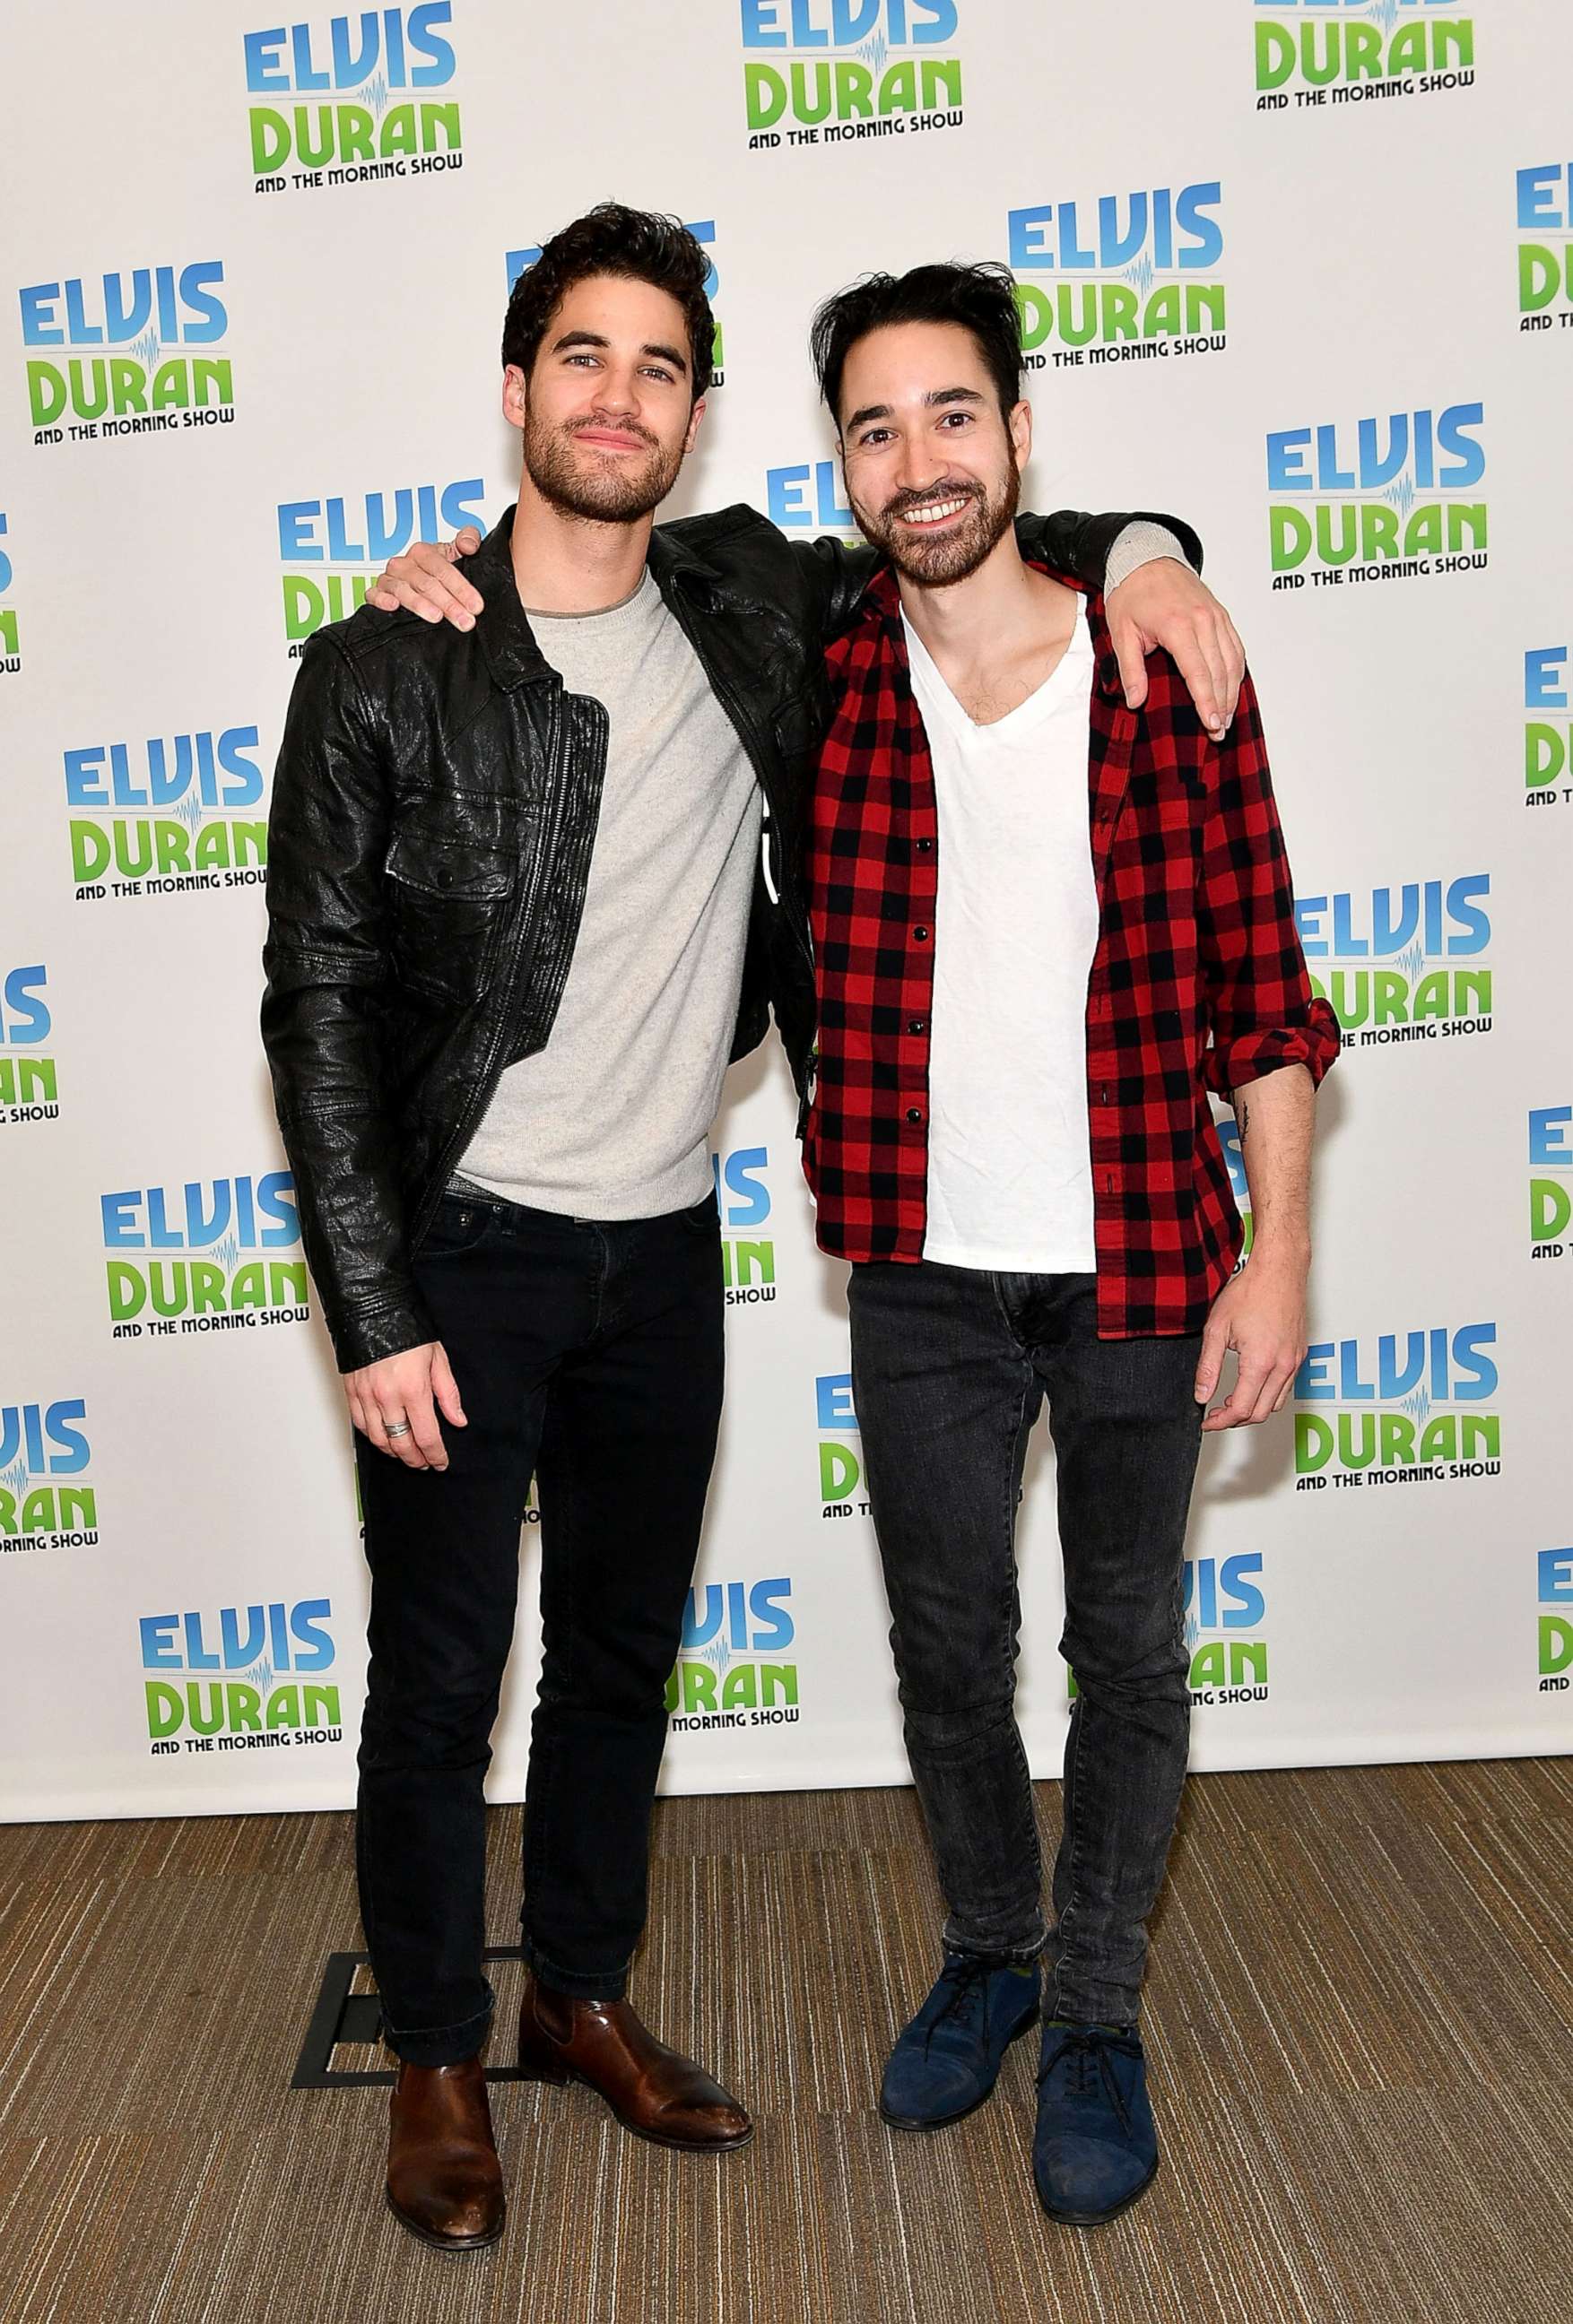 PHOTO: Darren Criss and Chuck Criss, right, visit "The Elvis Duran Z100 Morning Show" at Z100 Studio, March 9, 2017, in New York City.